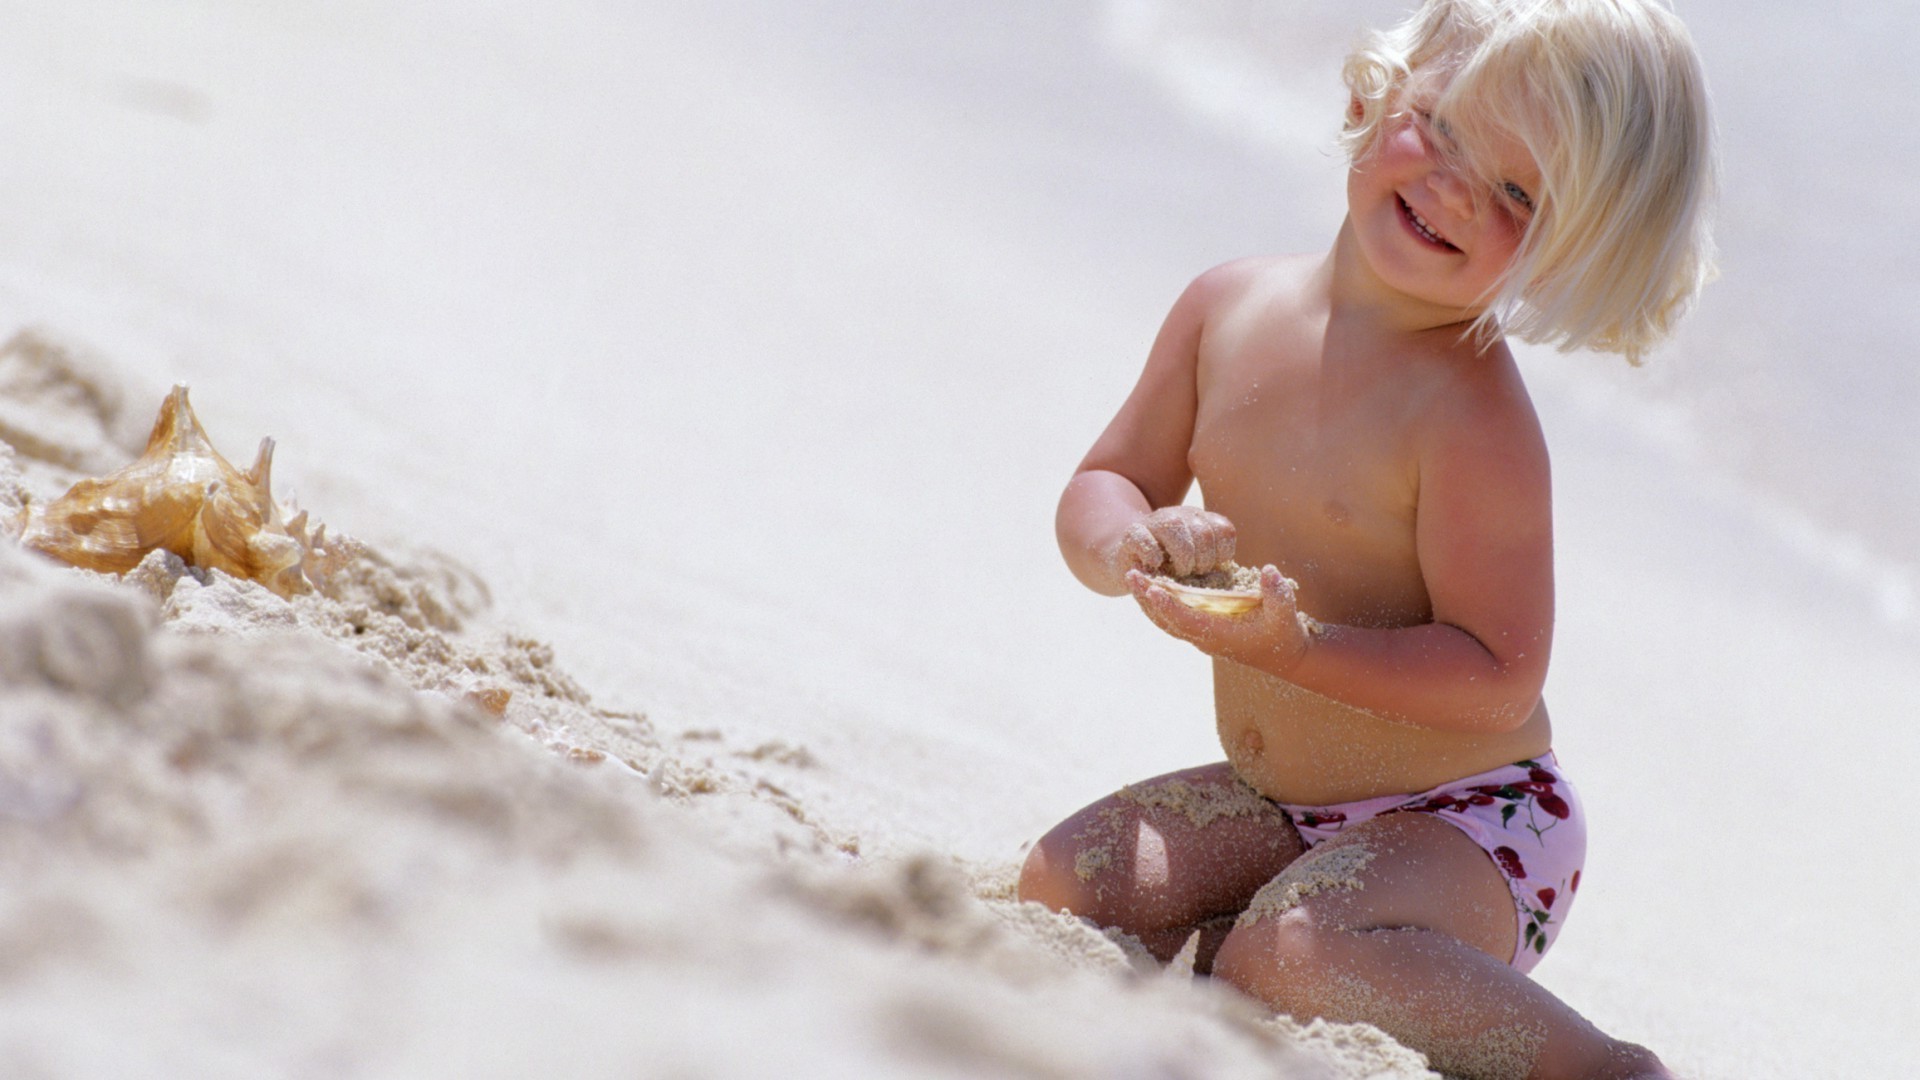 laughing children beach child sand girl fun one nude water woman leisure vacation summer sea outdoors seashore happiness nature enjoyment